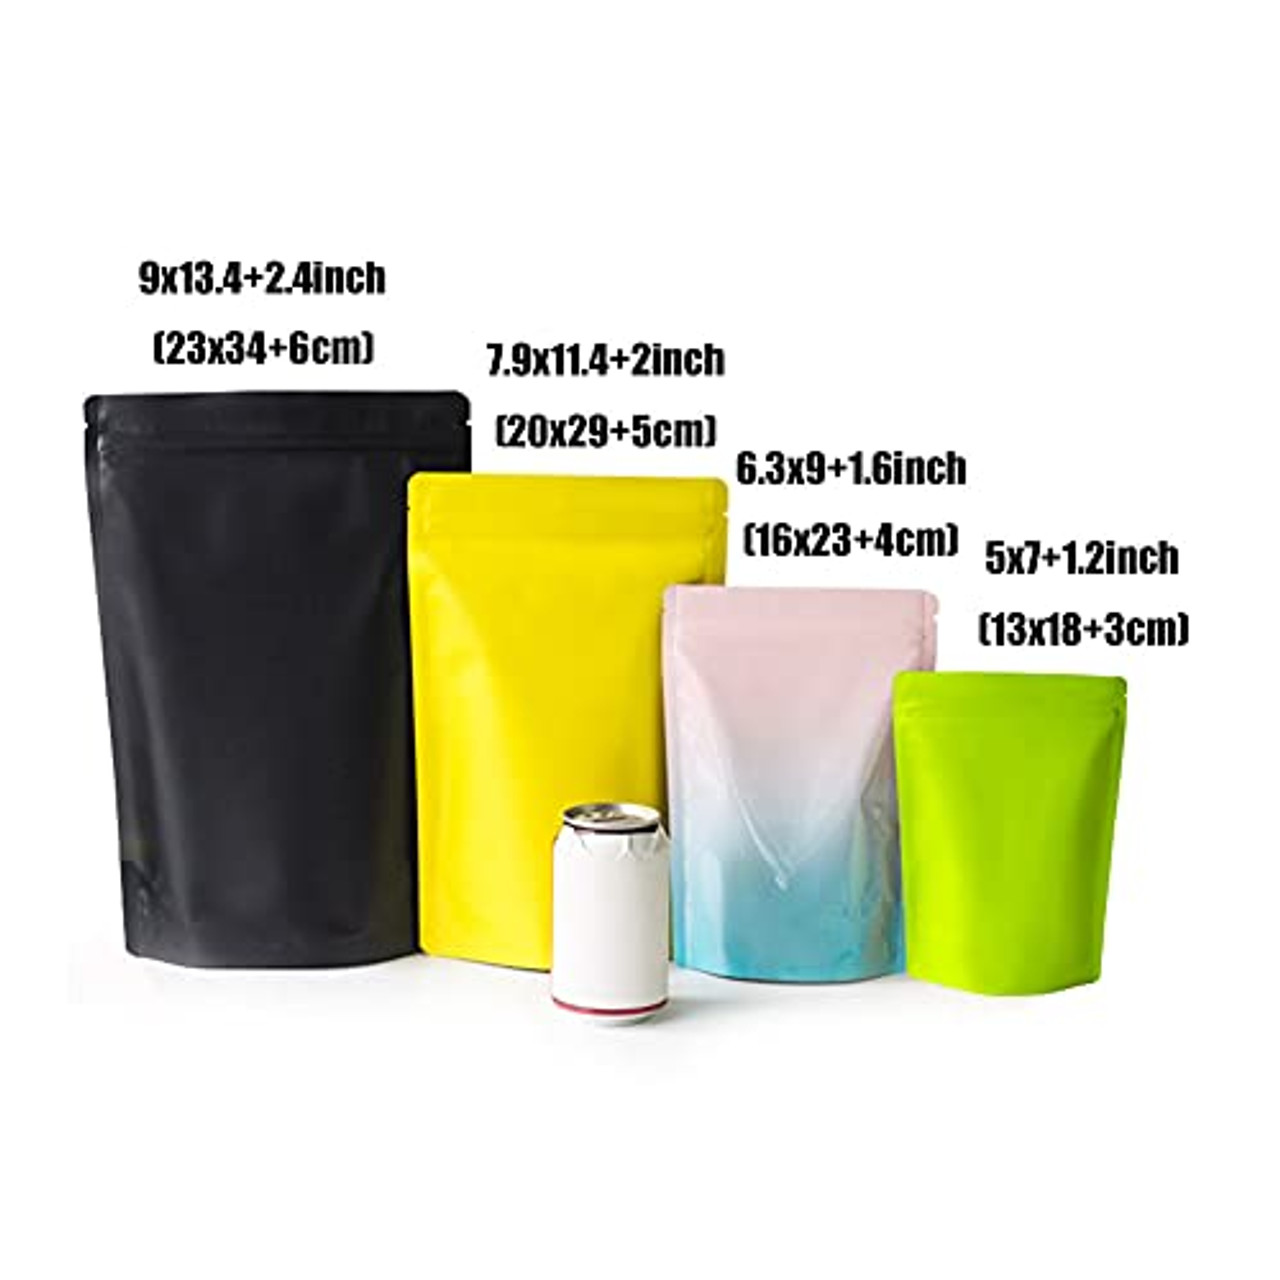 7.9x11.8 Candy Bags, 100PCS Stand Up Aluminum Foil Bags,Smell Proof  Bags,Reclosable Airtight Foil Bags,Reusable Food Pouches Bags with Zip